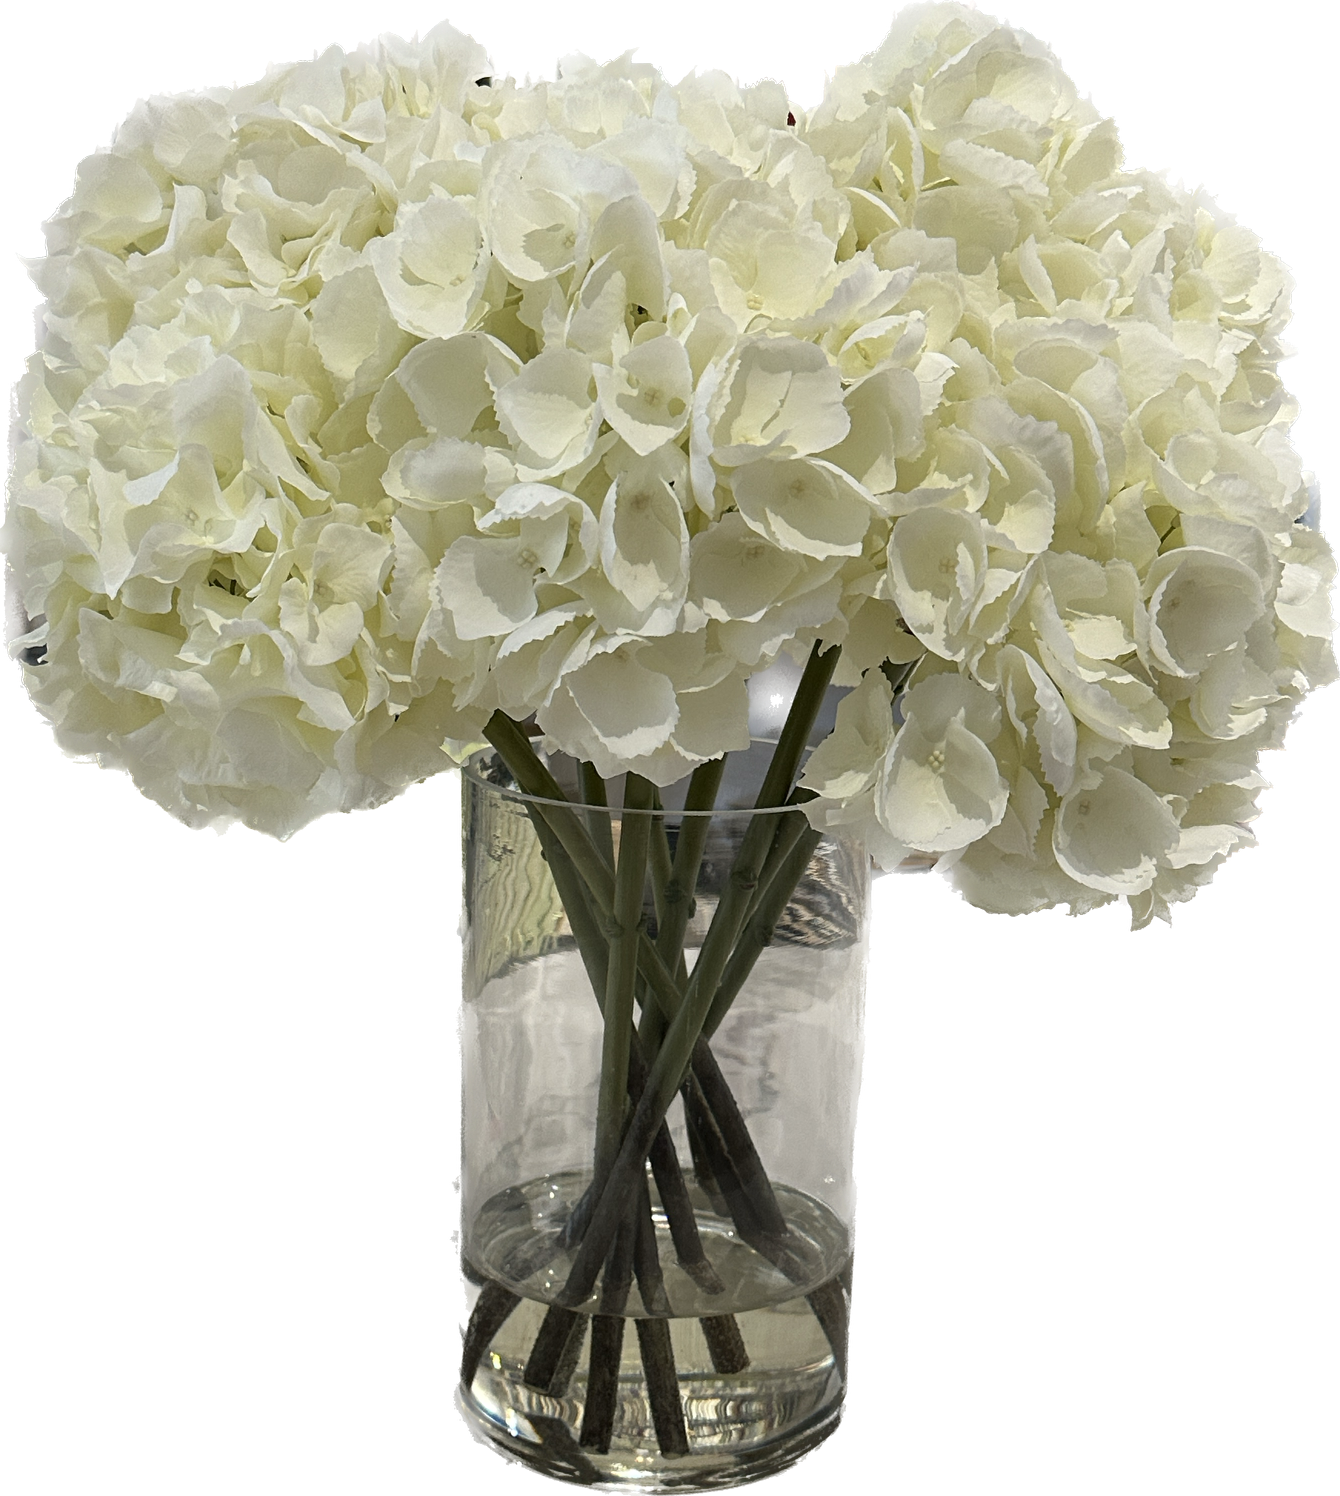 Large Hydrangea x10 in 6”x10” Cylinder-Faux Water (White)